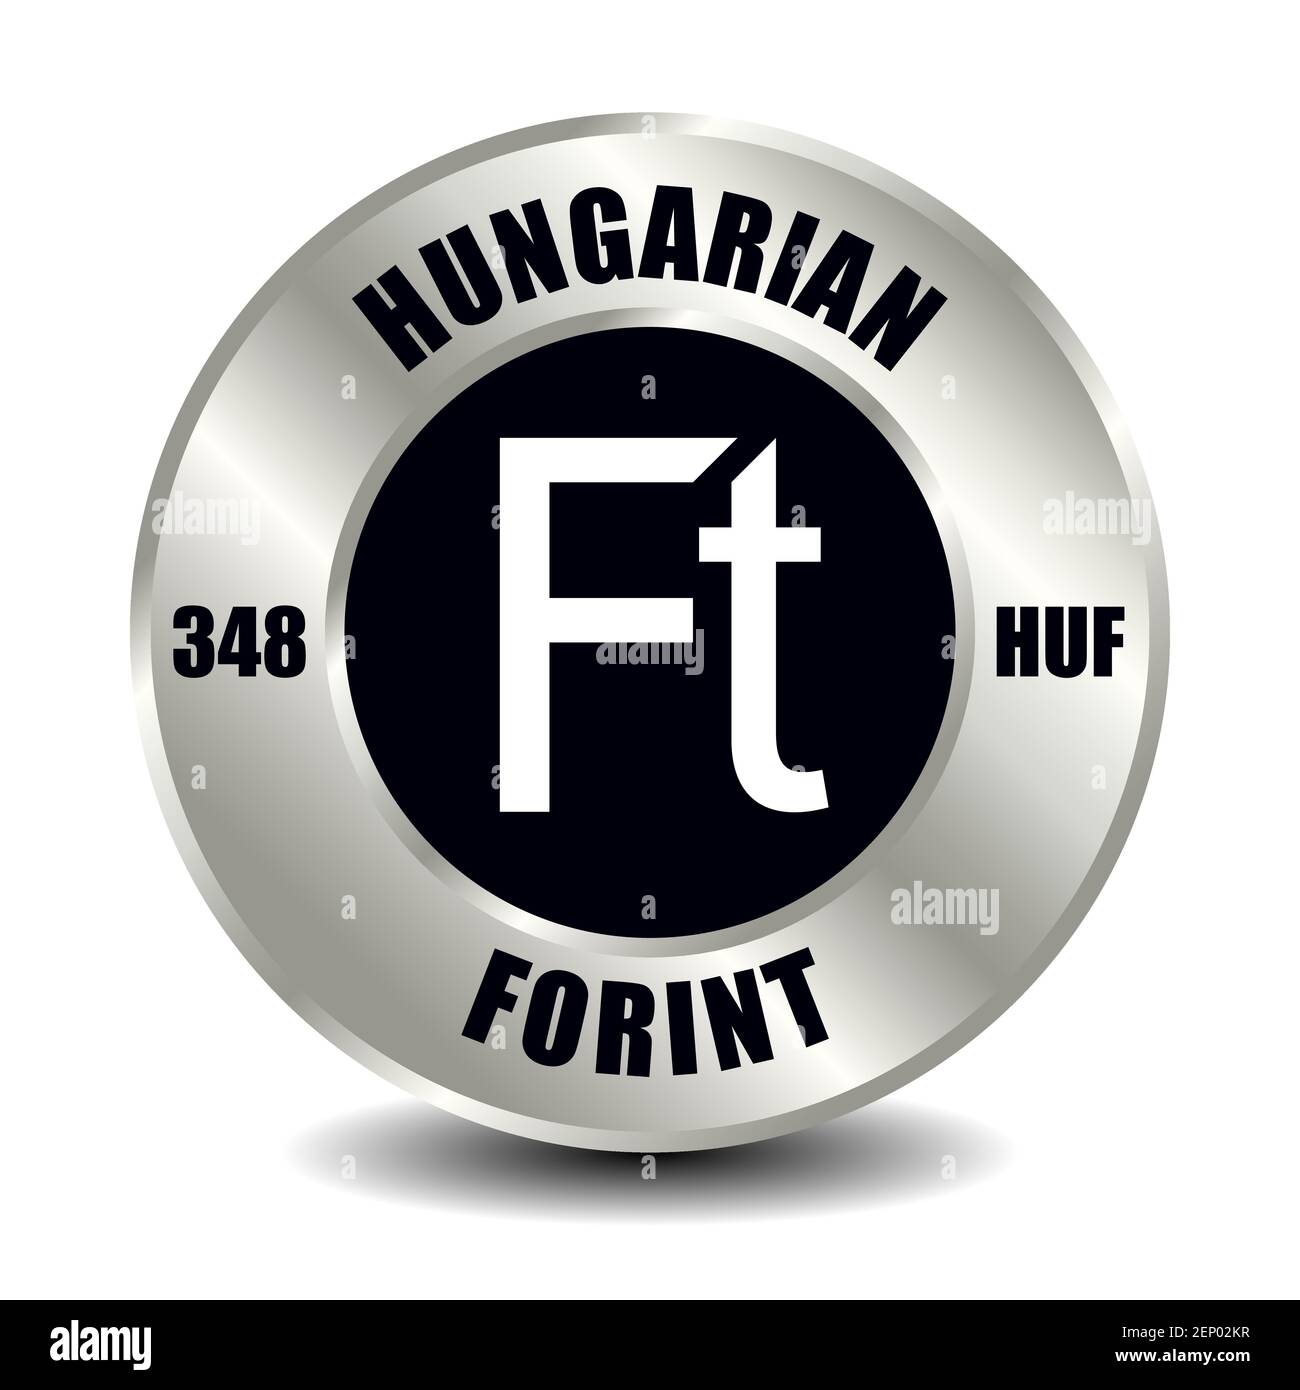 Hungary money icon isolated on round silver coin. Vector sign of currency symbol with international ISO code and abbreviation Stock Vector